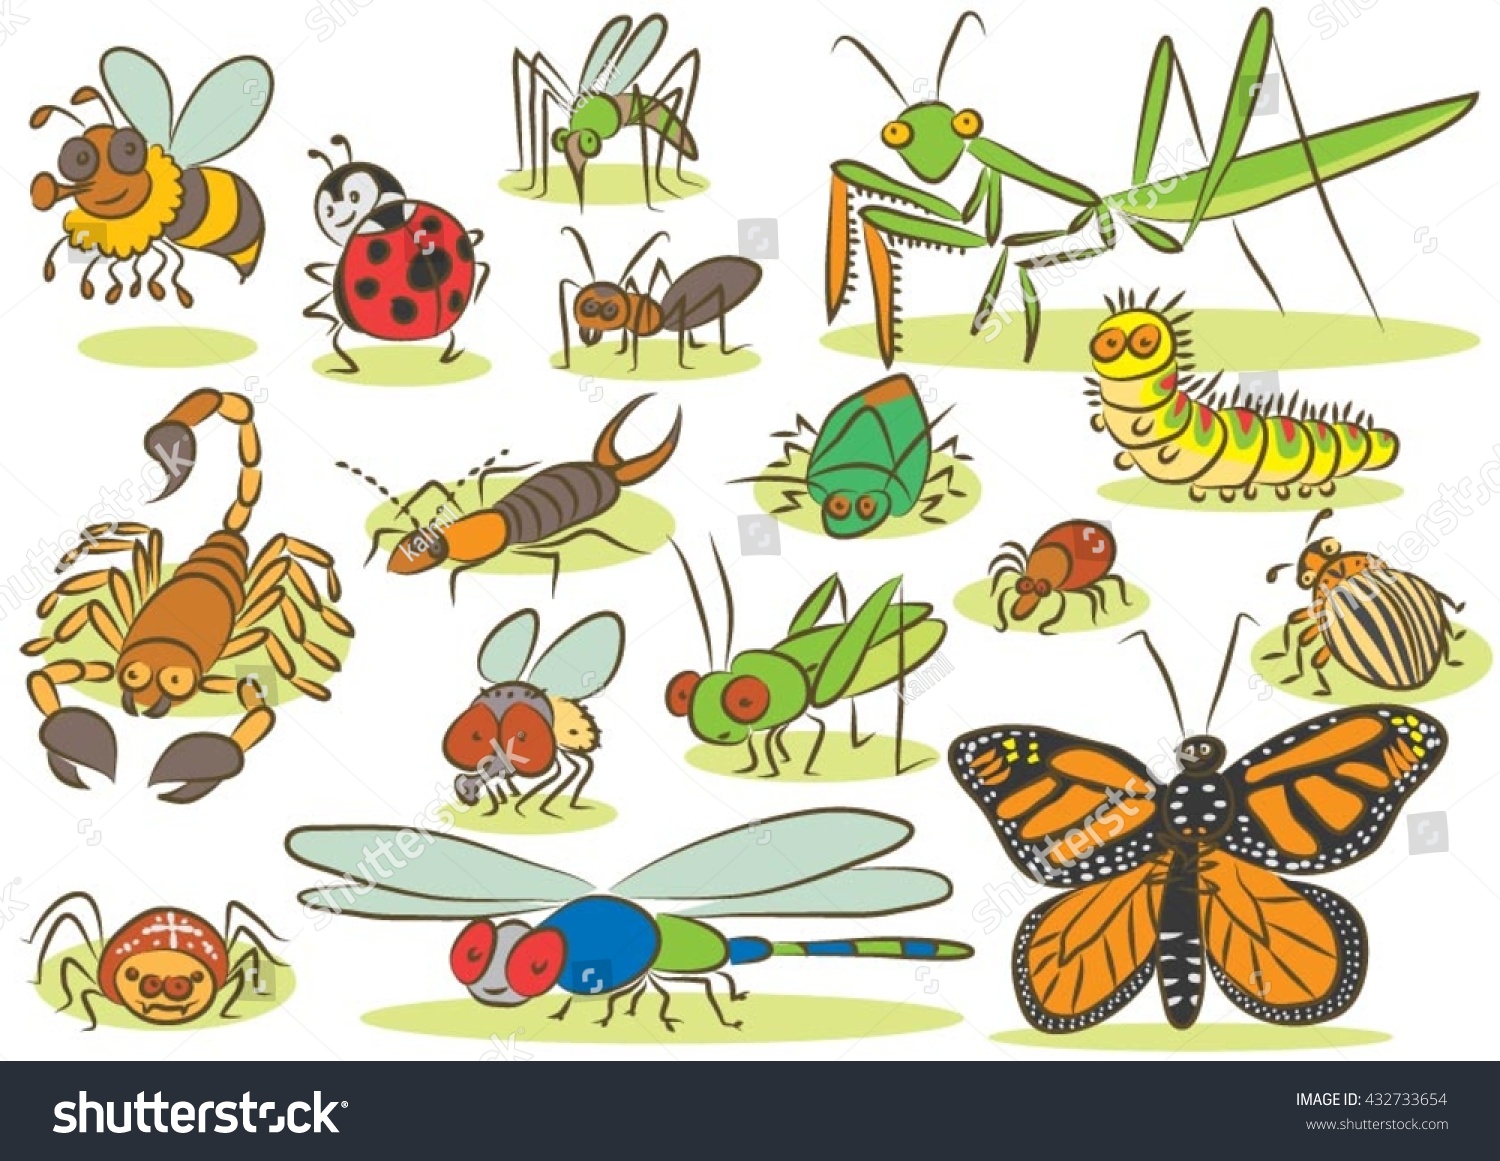 Insects Animals Kids Drawings Stock Vector Royalty Free 432733654